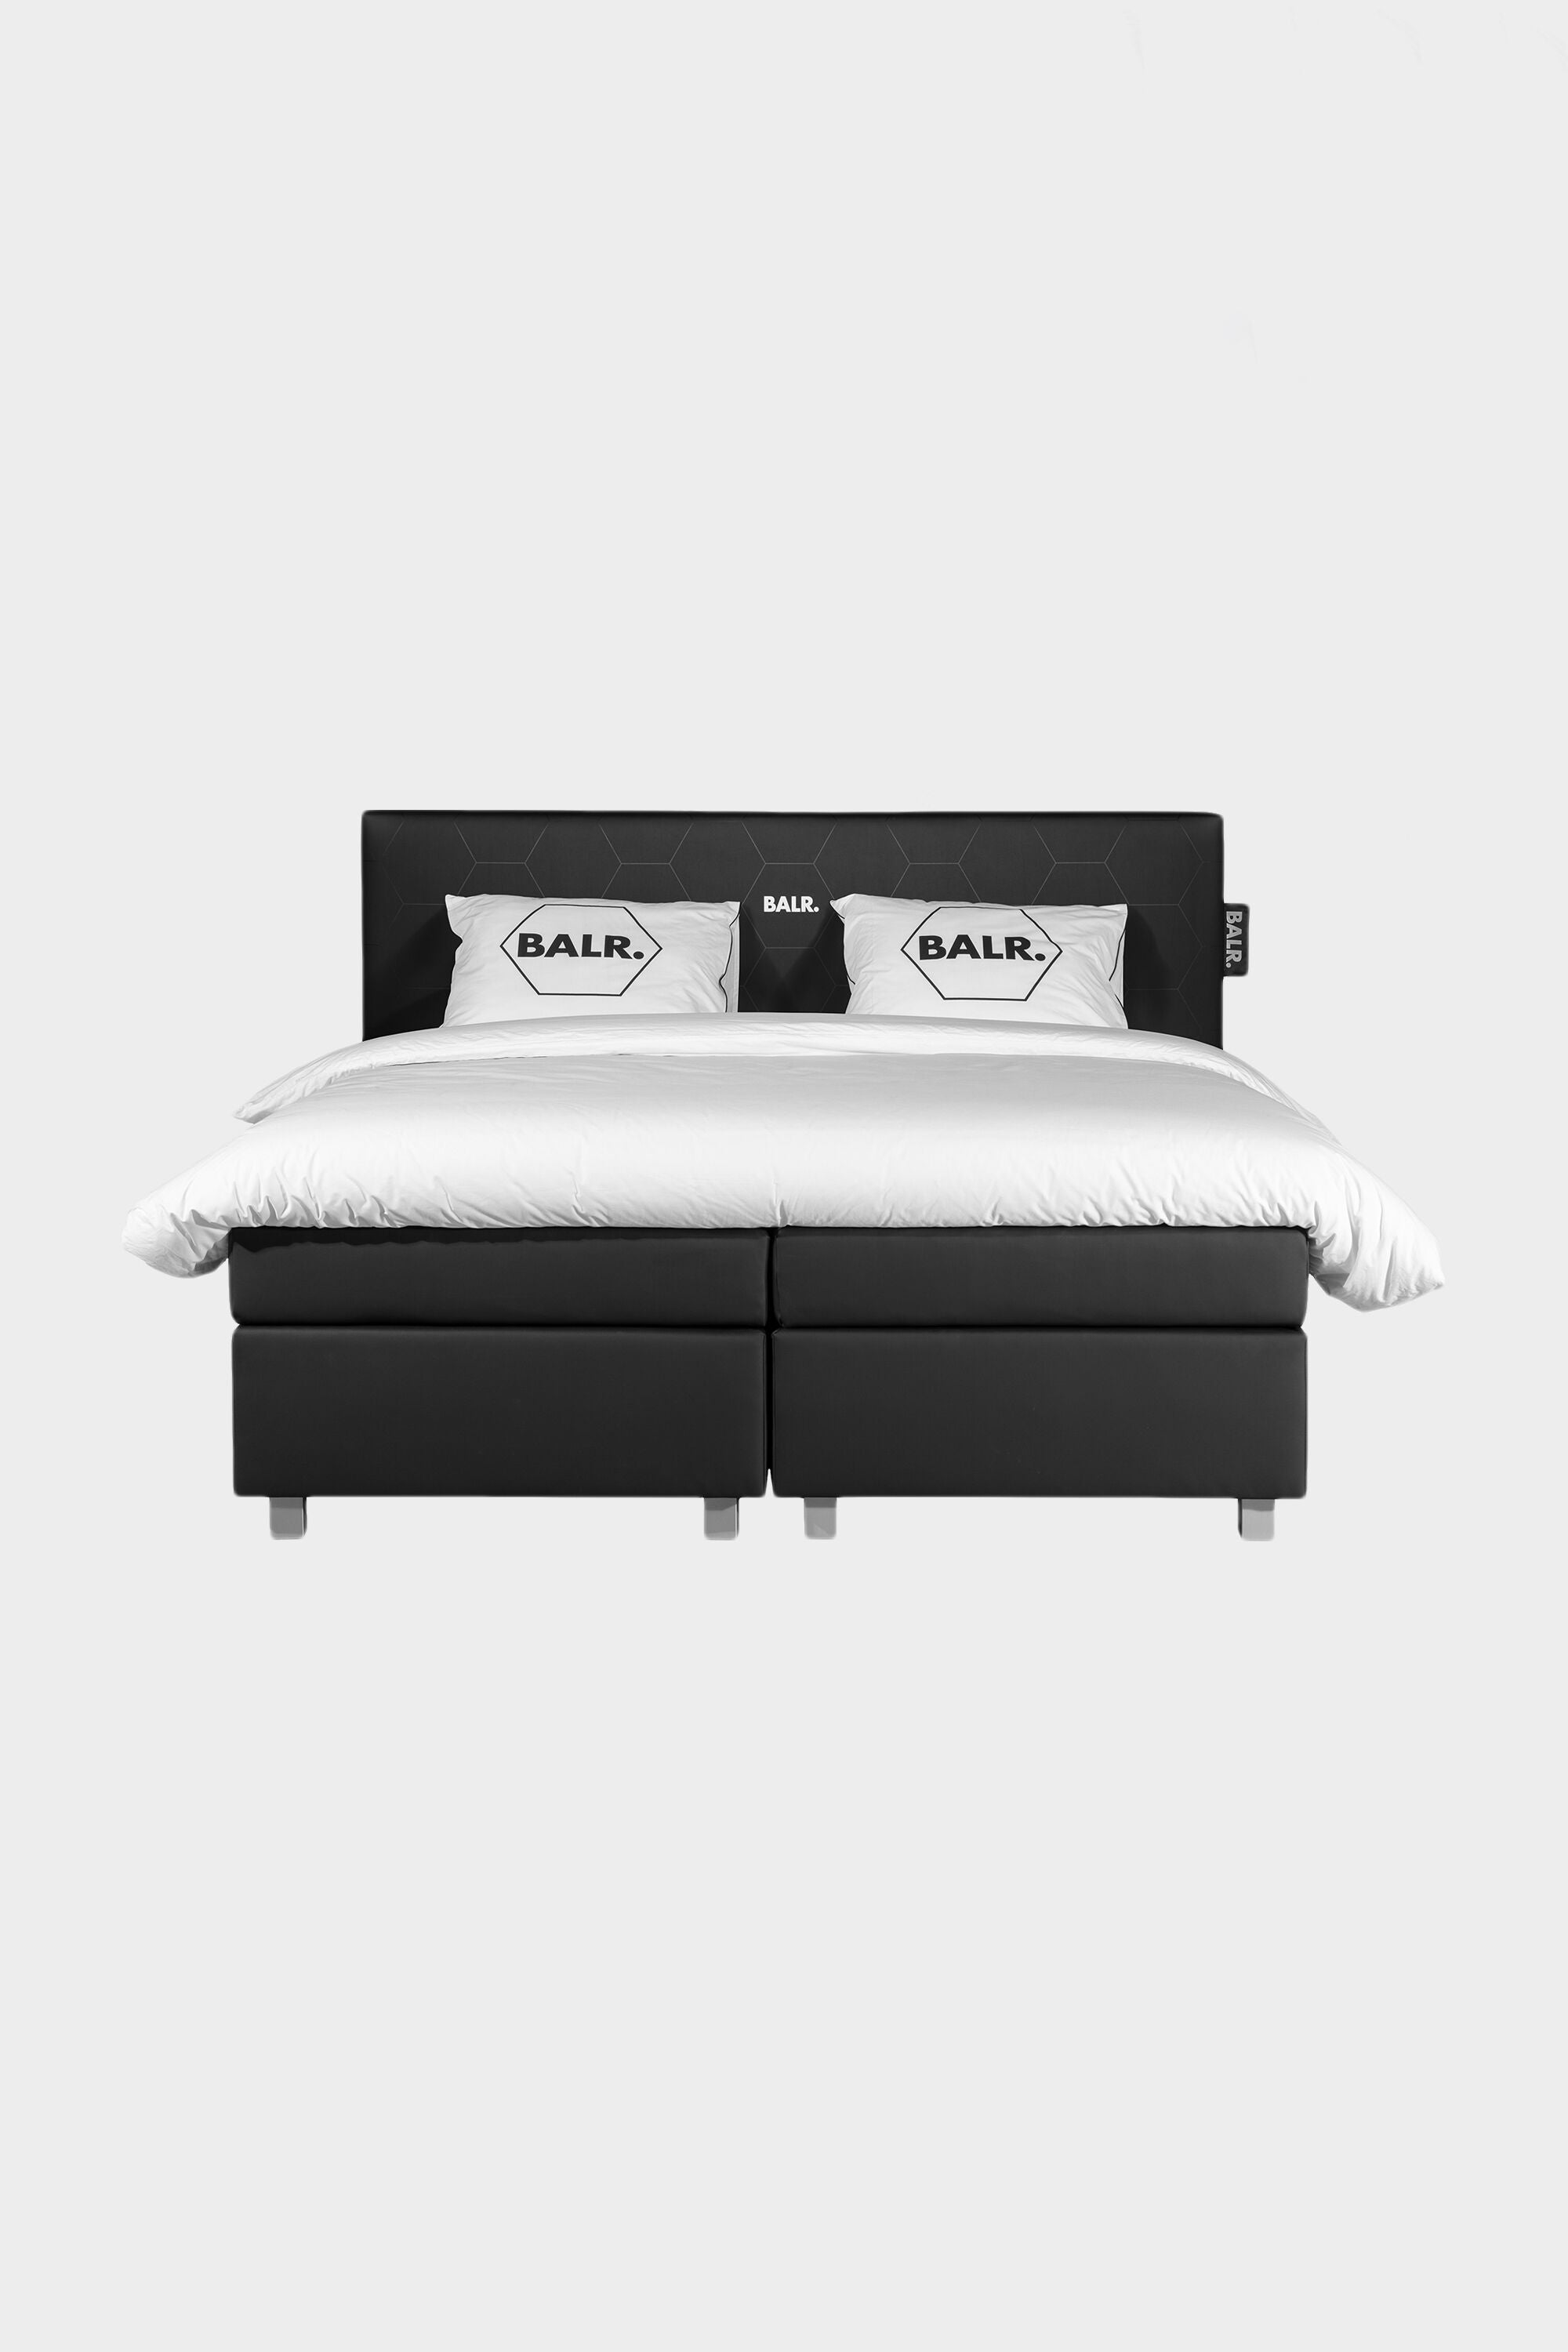 Shopify-BALR.-BED-Experience---1.jpg